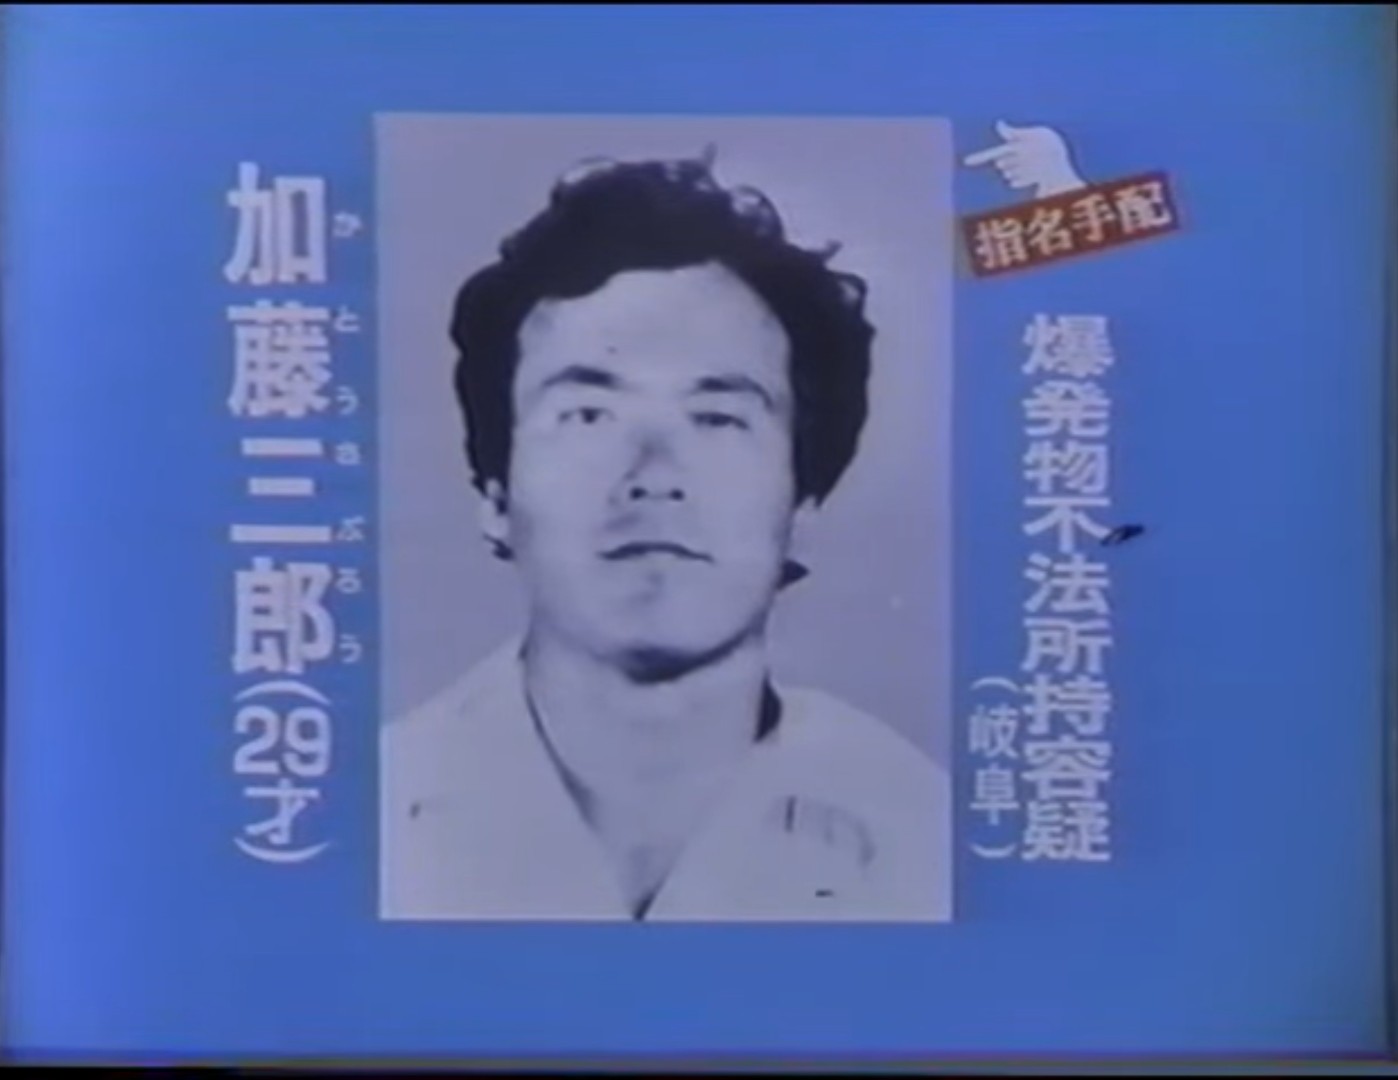 Wanted Suspects - Wanted Suspects (found Tokyo Metropolitan Police Department commercial; 1970s)